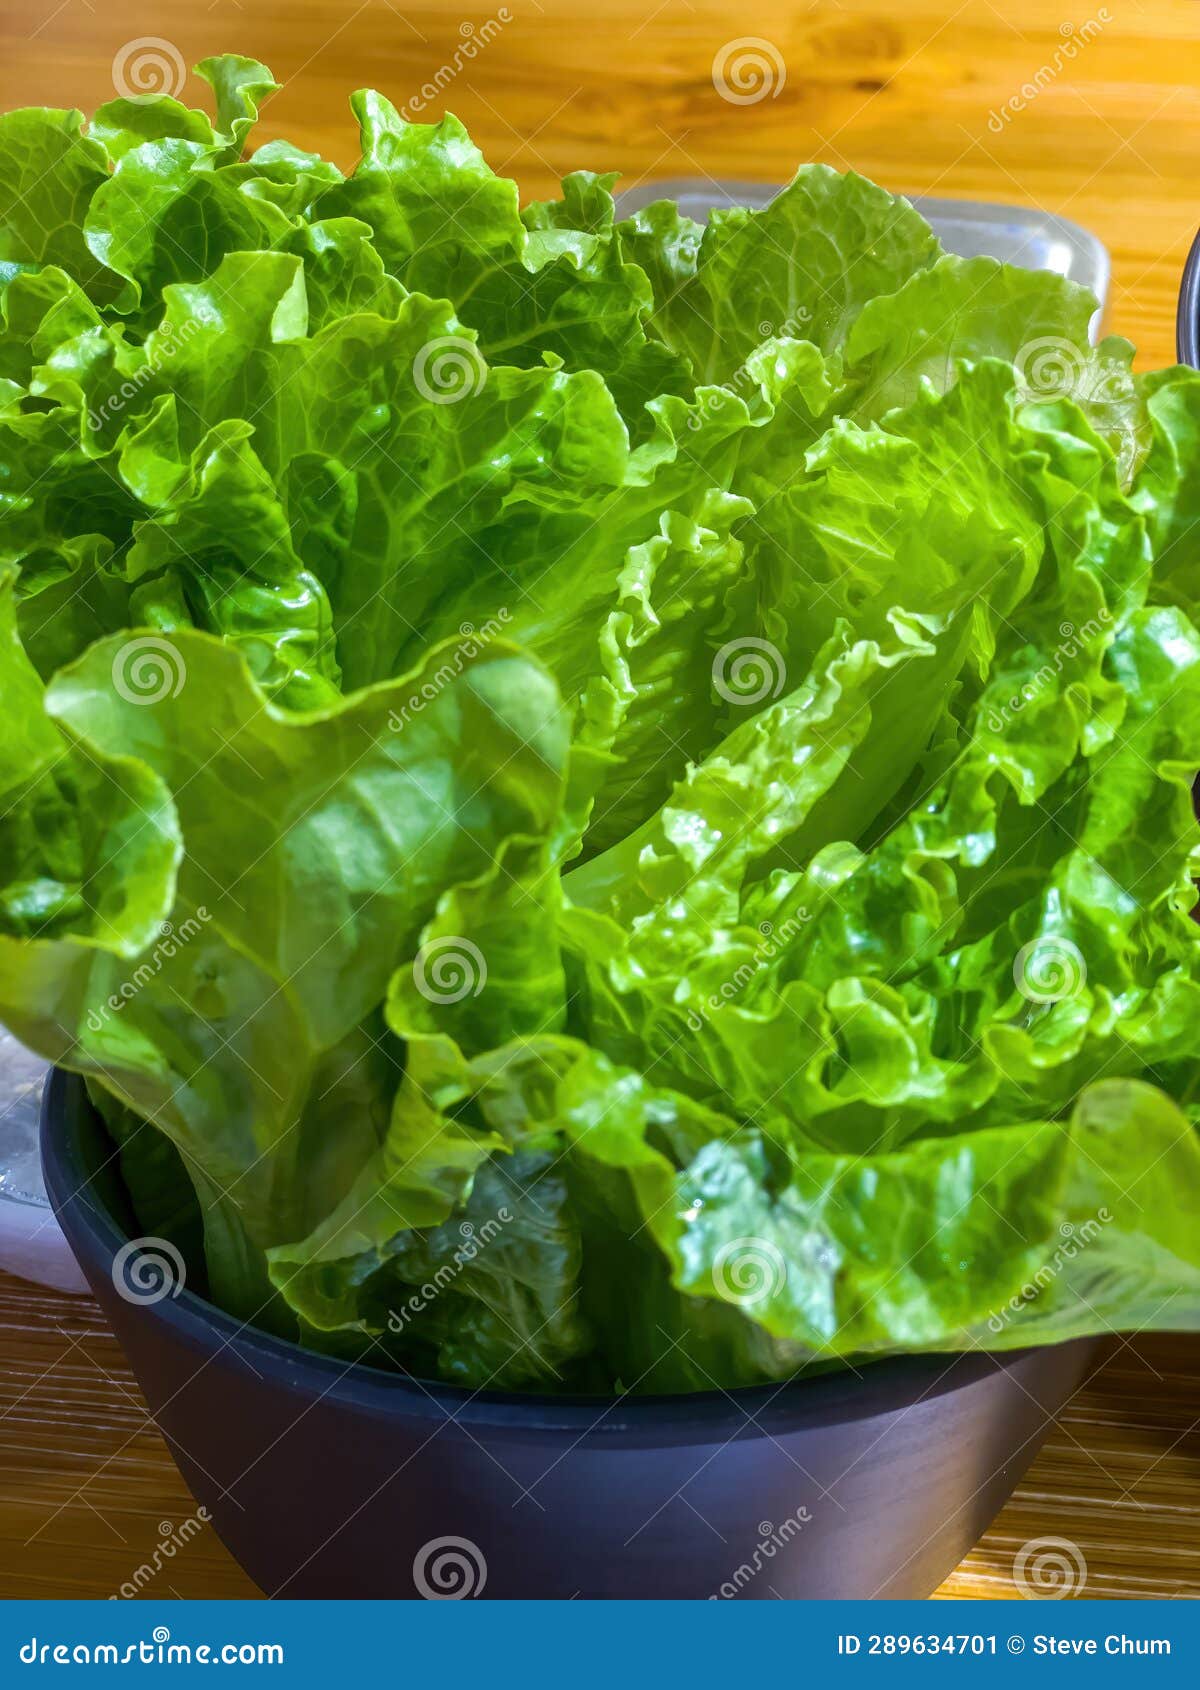 fresh green ingredients lettuce close-up